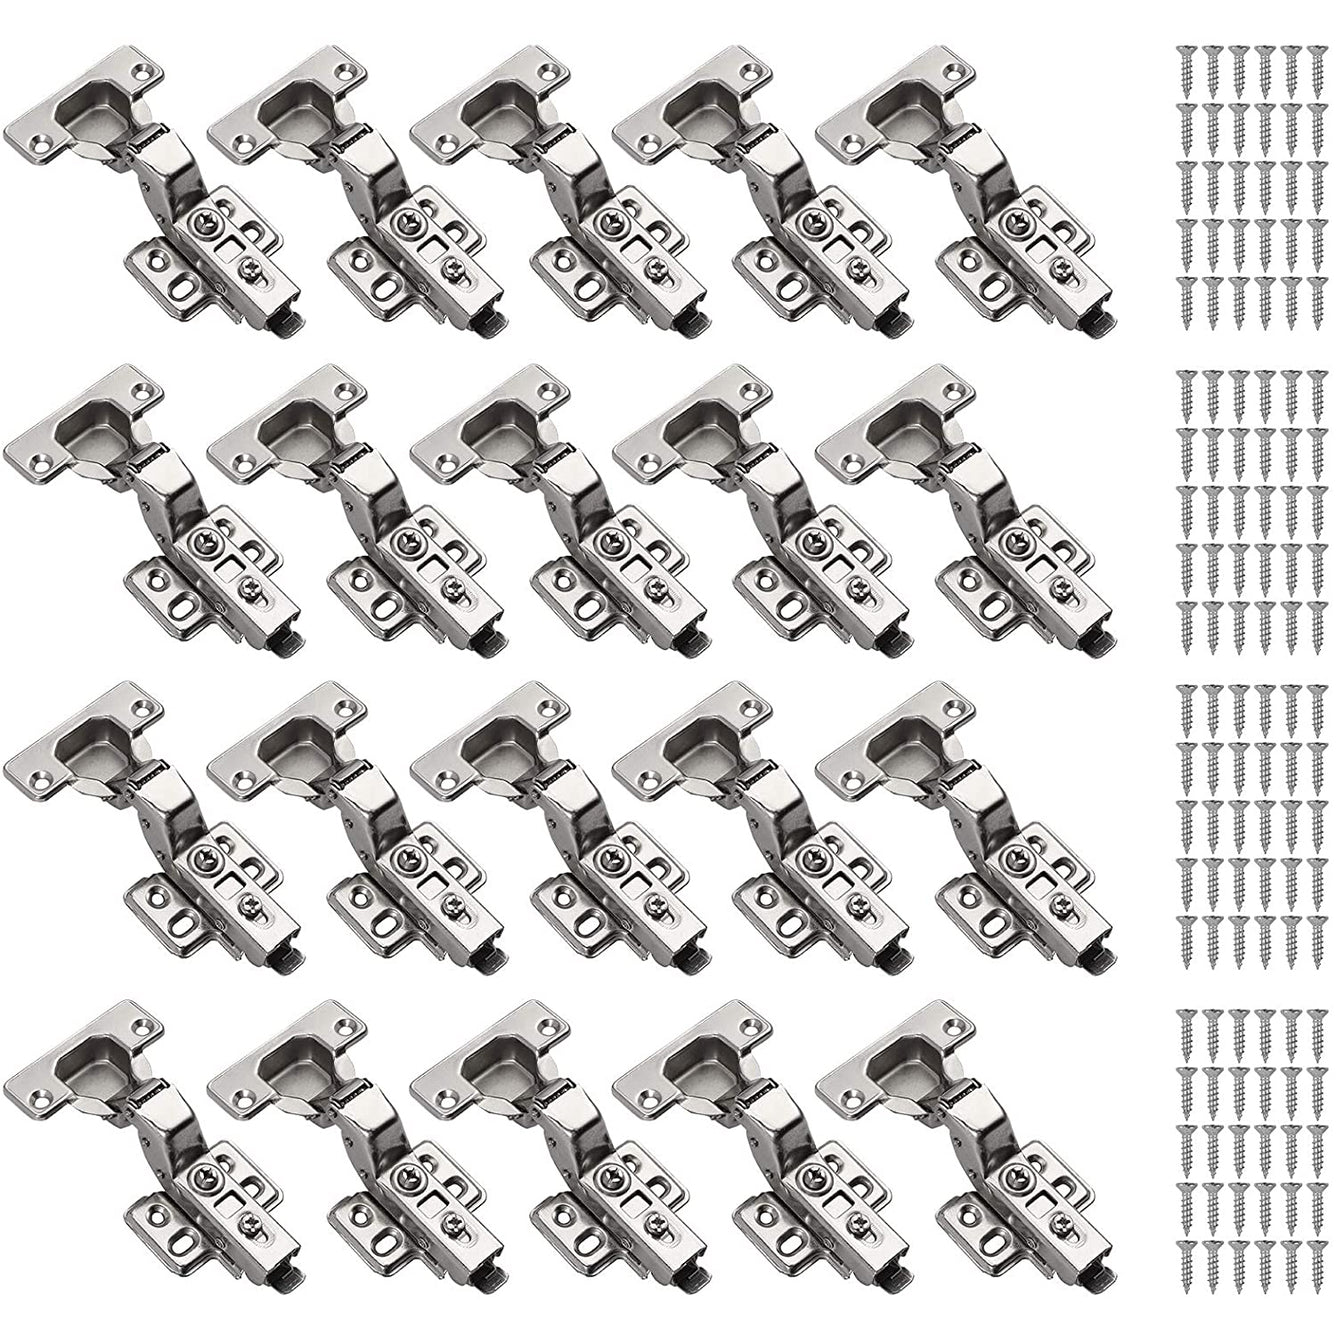 Neoteck 20PCs Brand Hydraulic Clip-On Soft Close Hinges